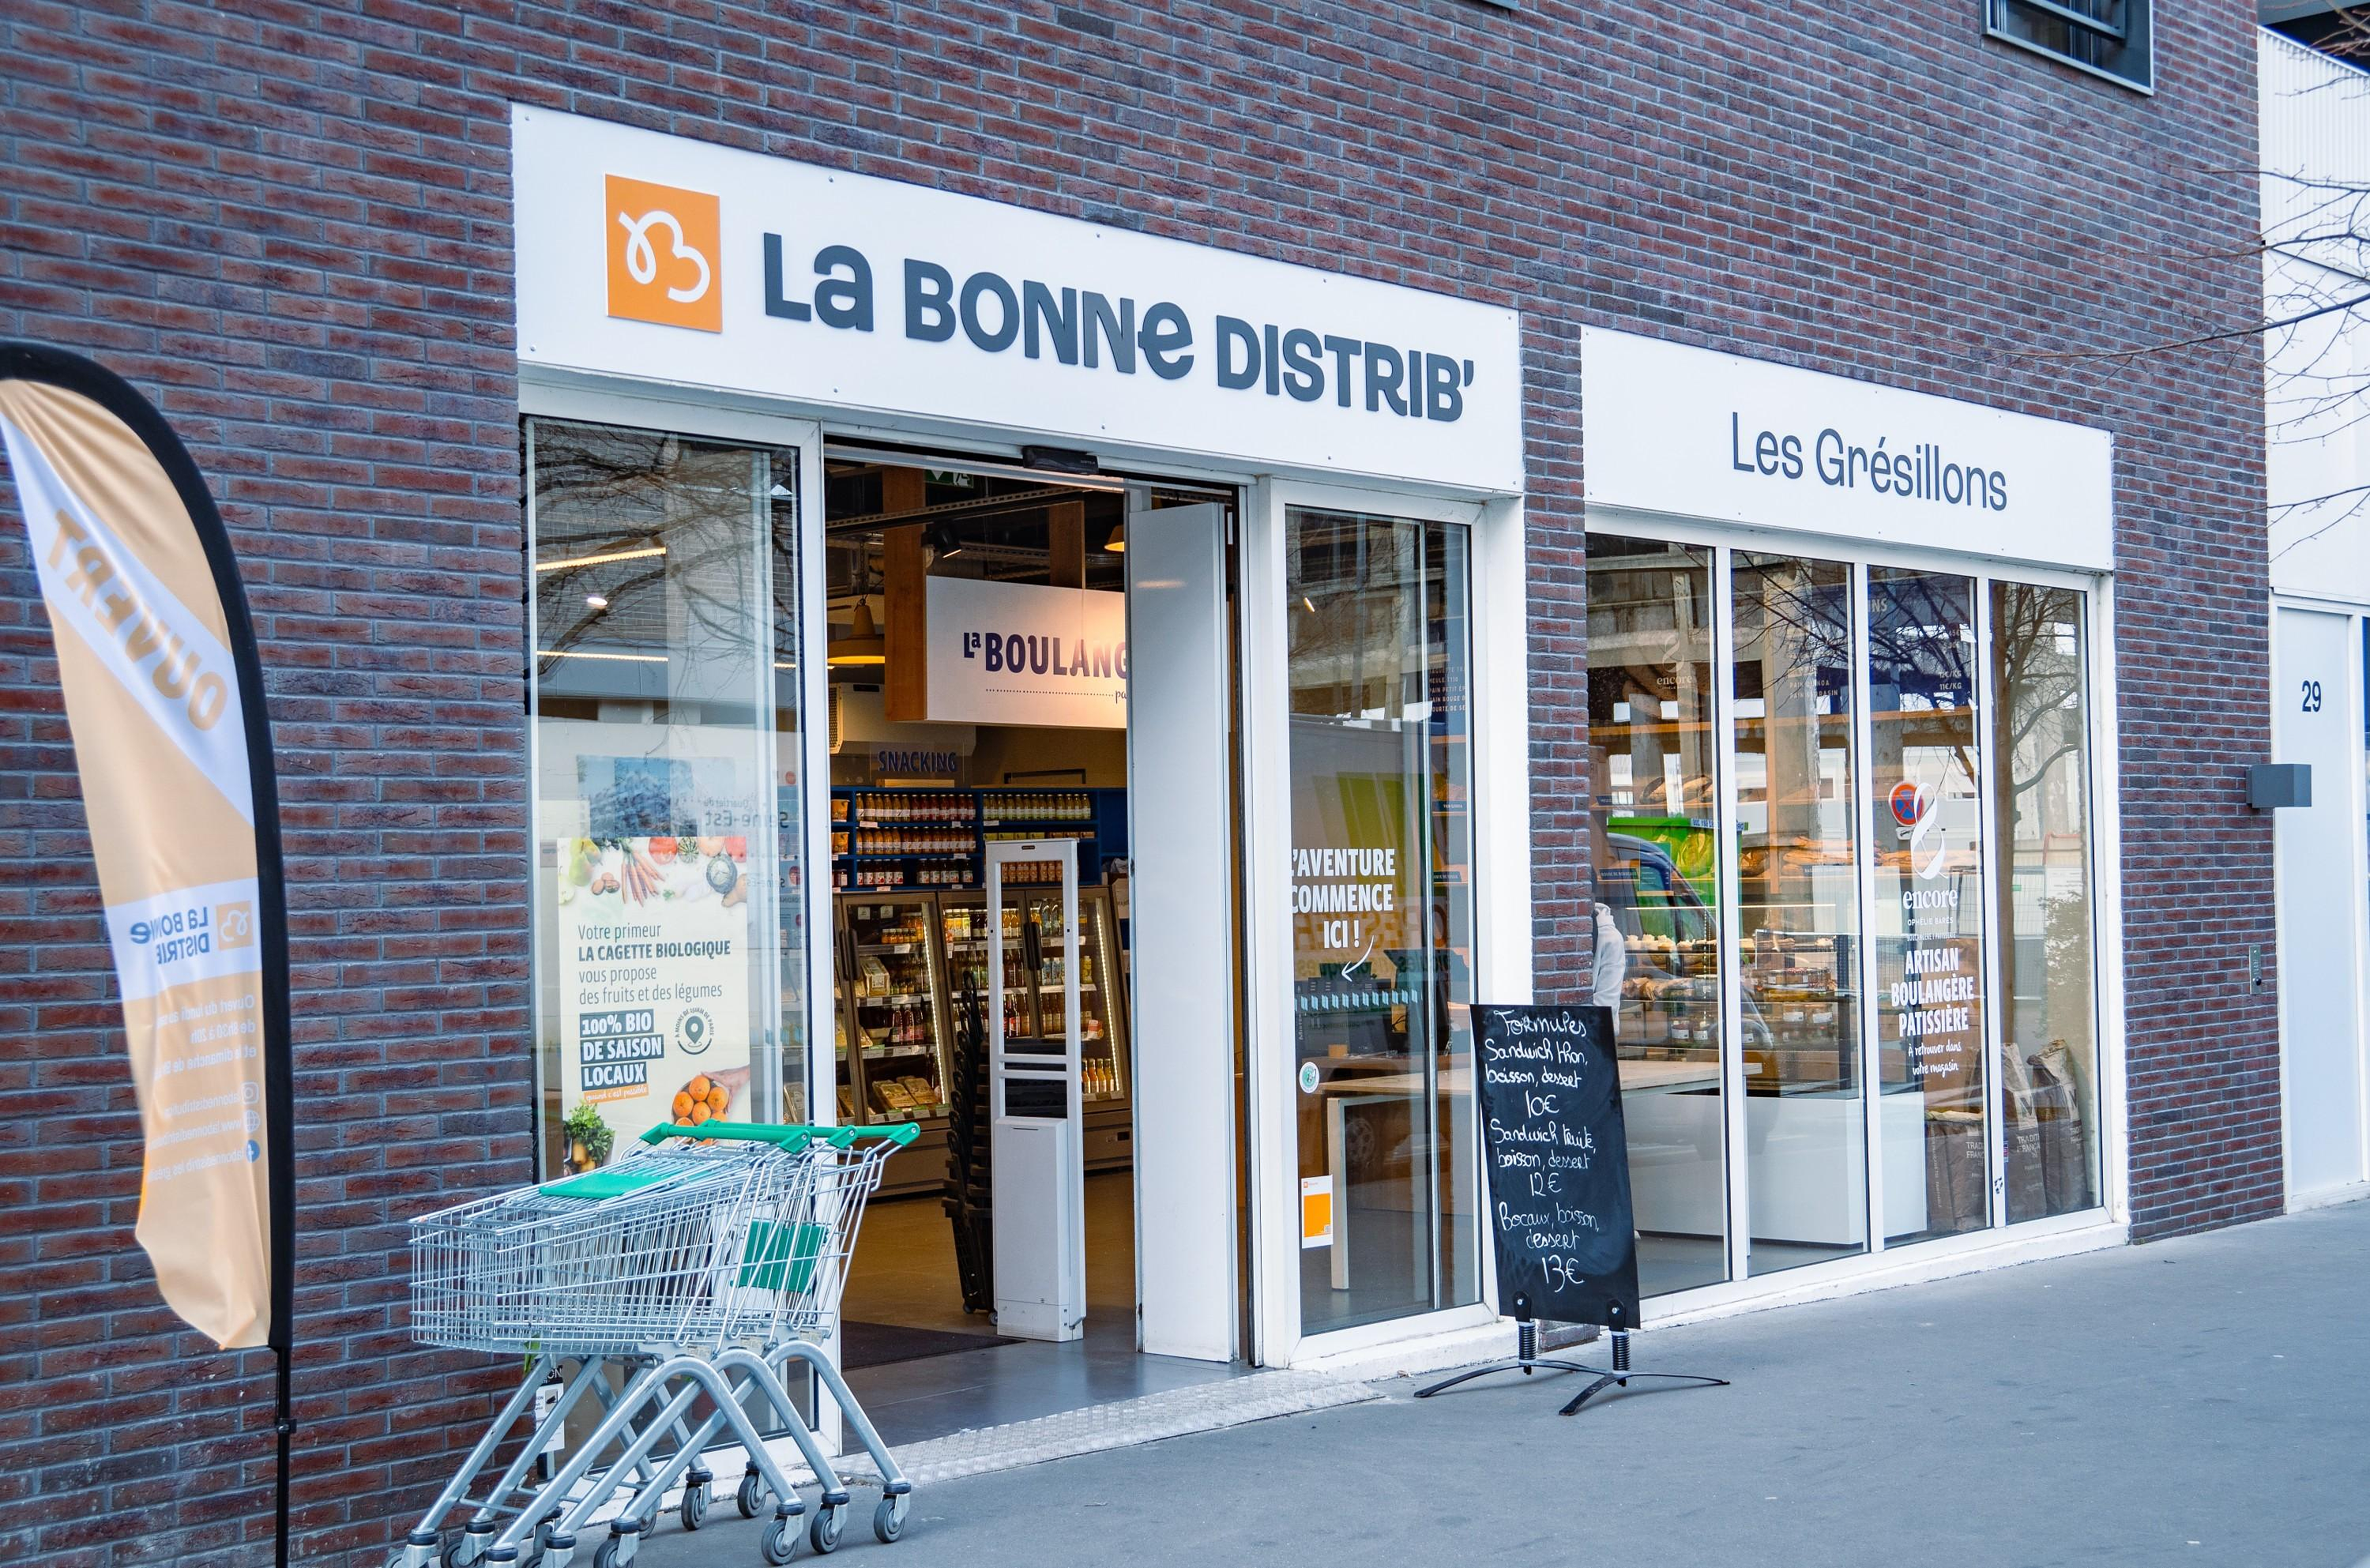 La Bonne Distrib’, this new supermarket which focuses on “real taste” by banning ultra-processed ingredients